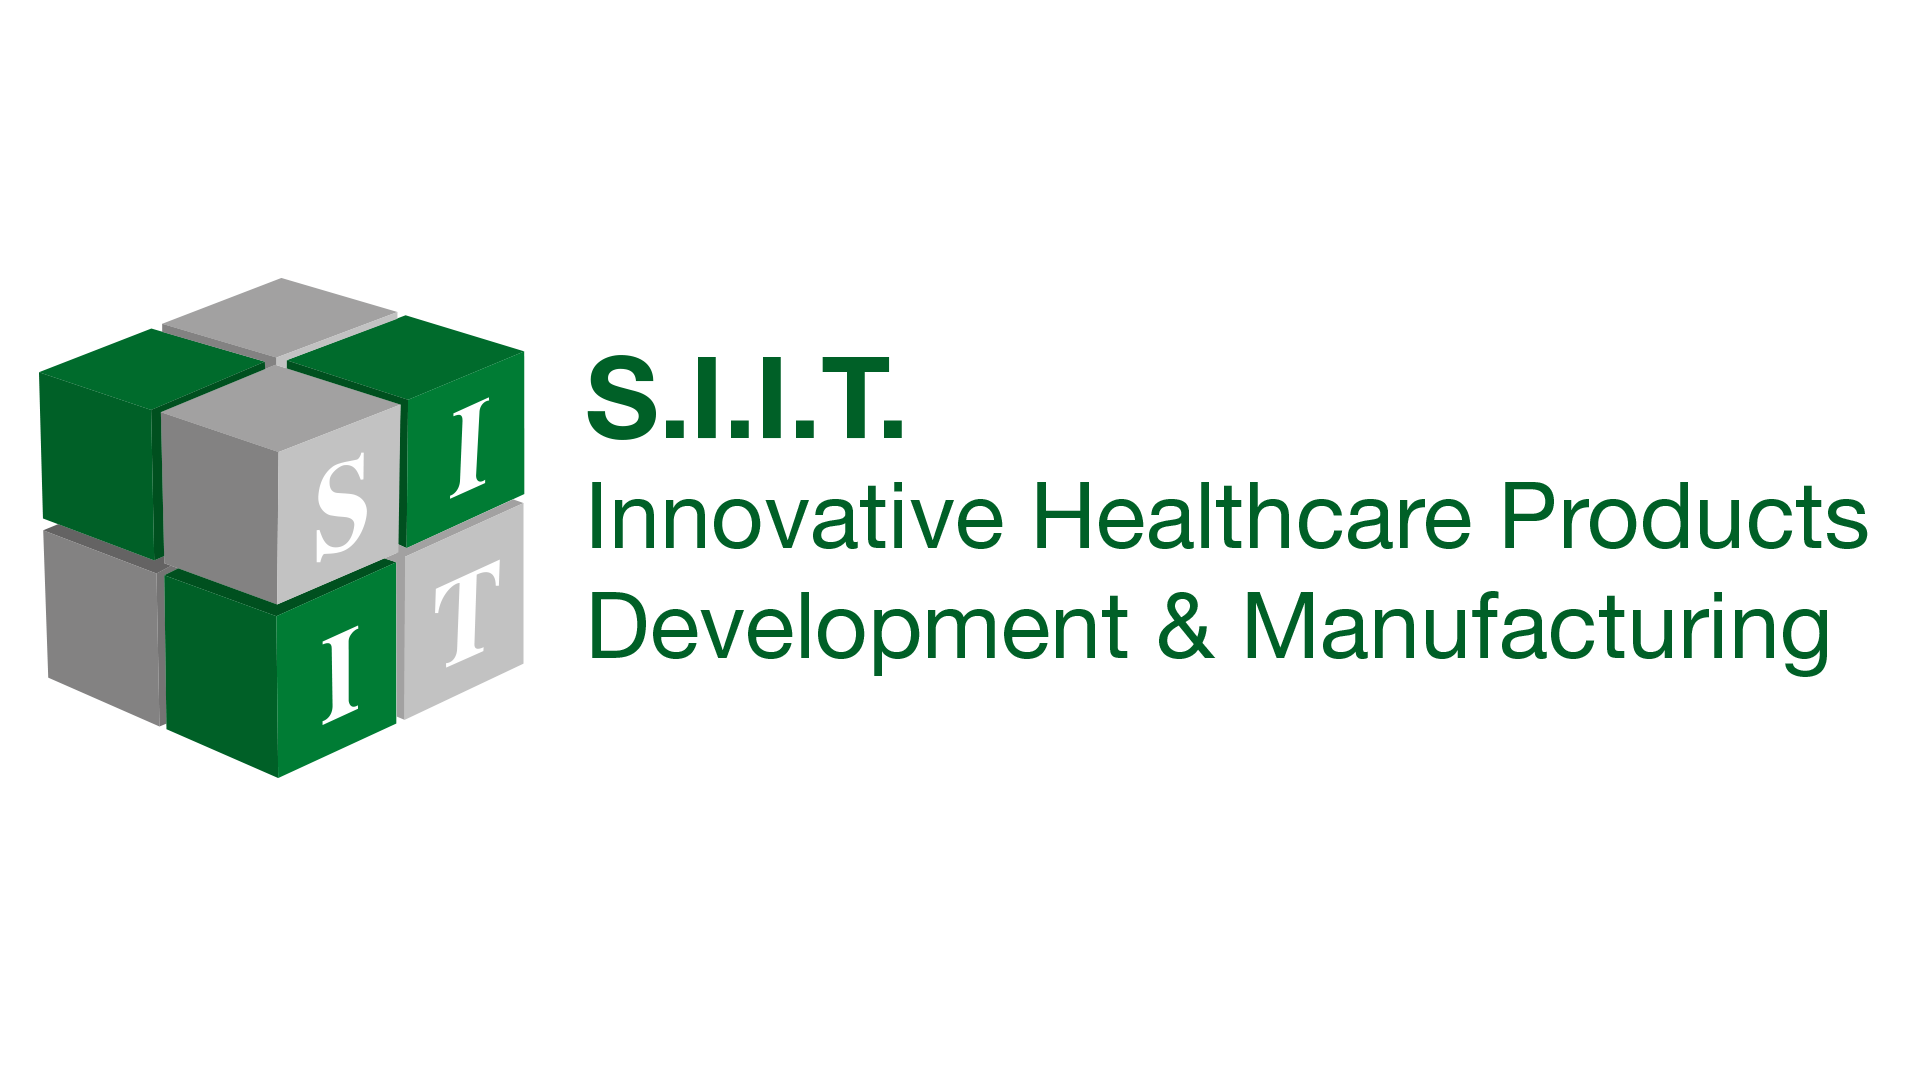 S.I.I.T. Innovative Healthcare Products Development & Manufacturing